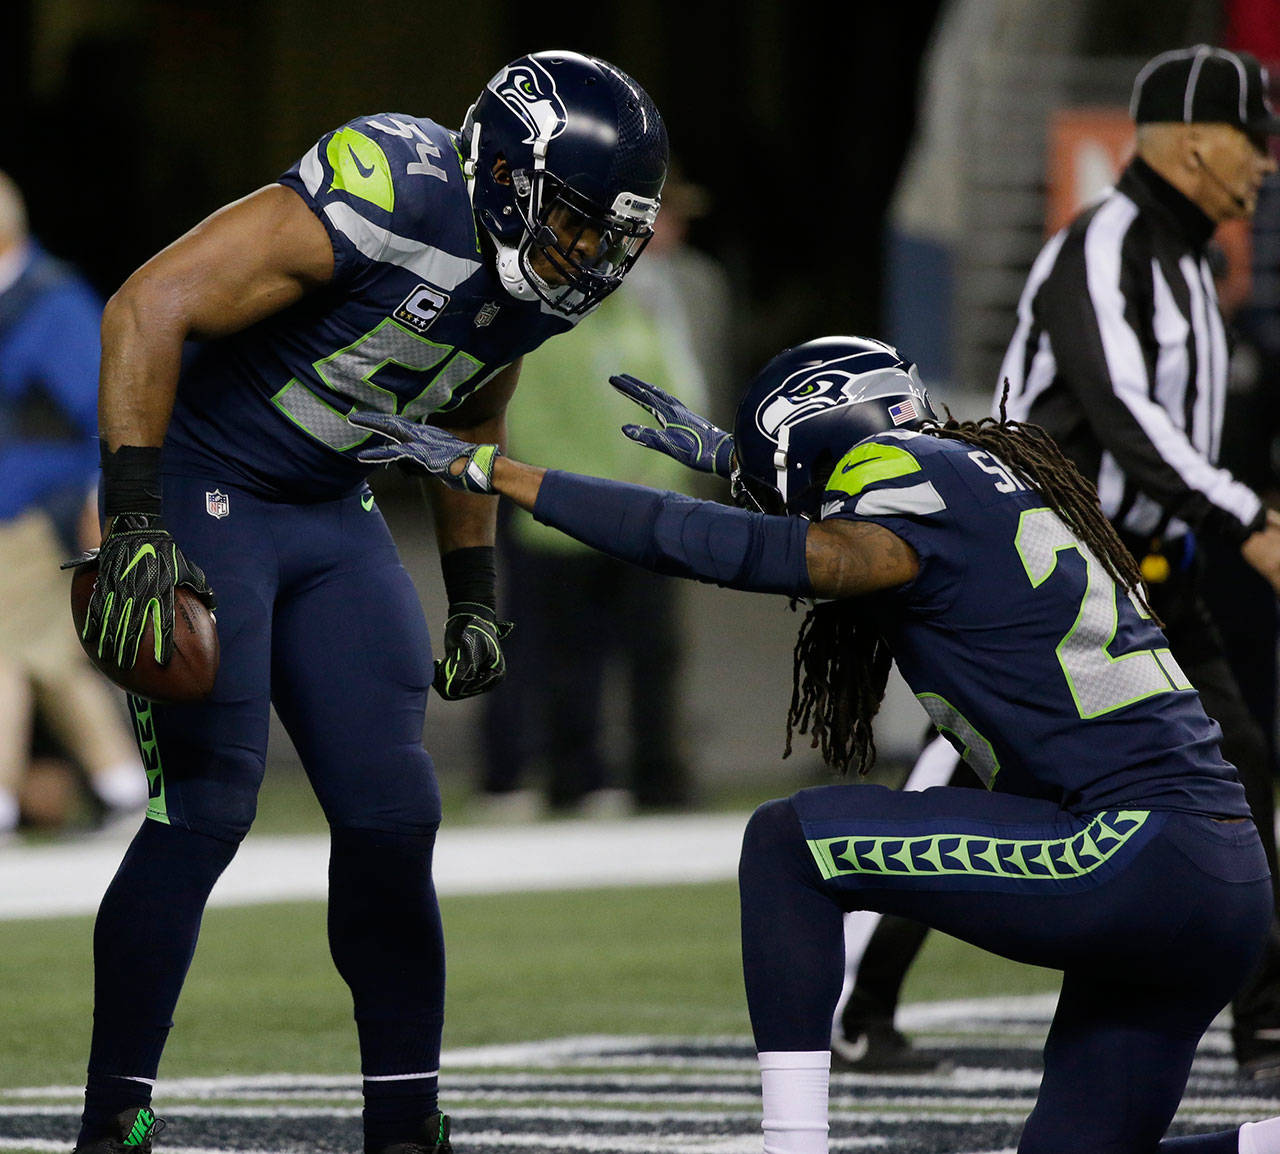 Seahawks cornerback Richard Sherman (right) bows before middle linebacker Bobby Wagner after Wagner recovered a fumble for a touchdown against the Colts on Oct. 1, 2017, in Seattle. (AP Photo/Elaine Thompson)